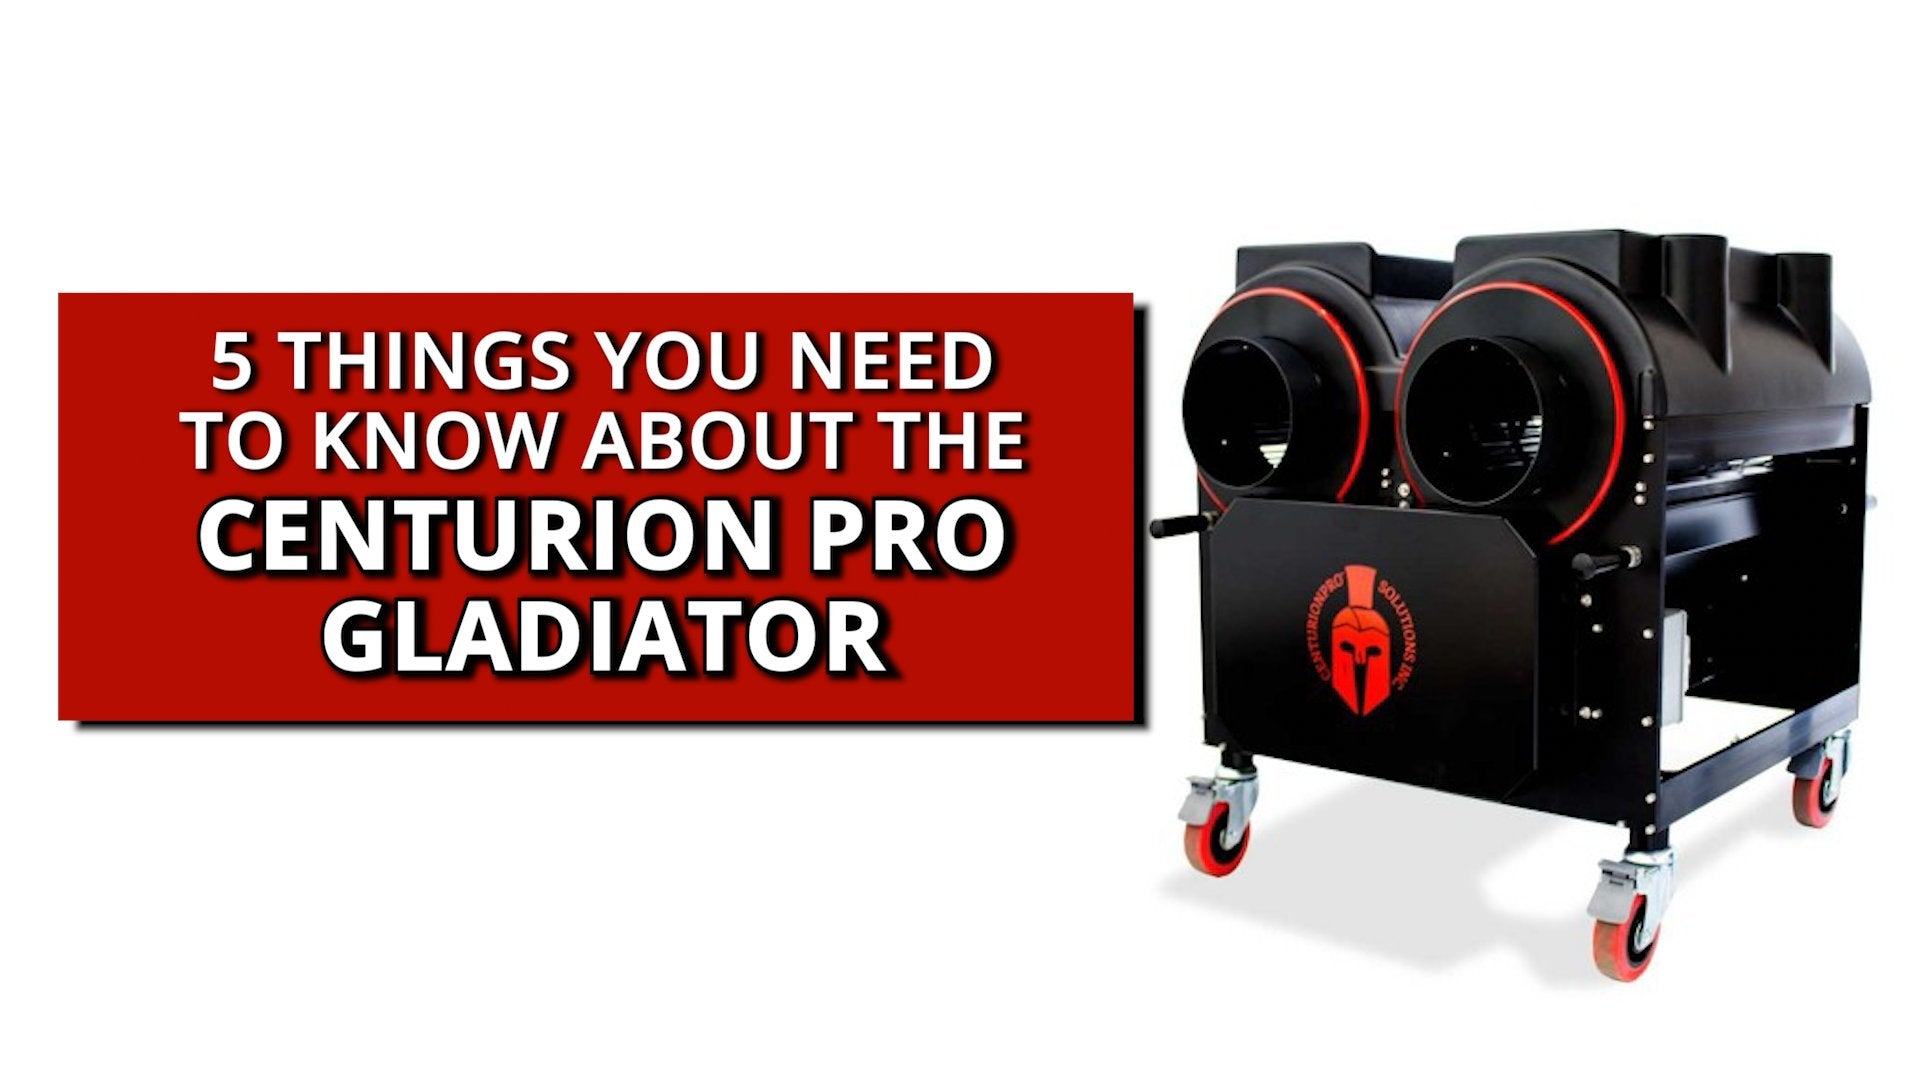 5 Things You Need to Know About the CenturionPro Gladiator